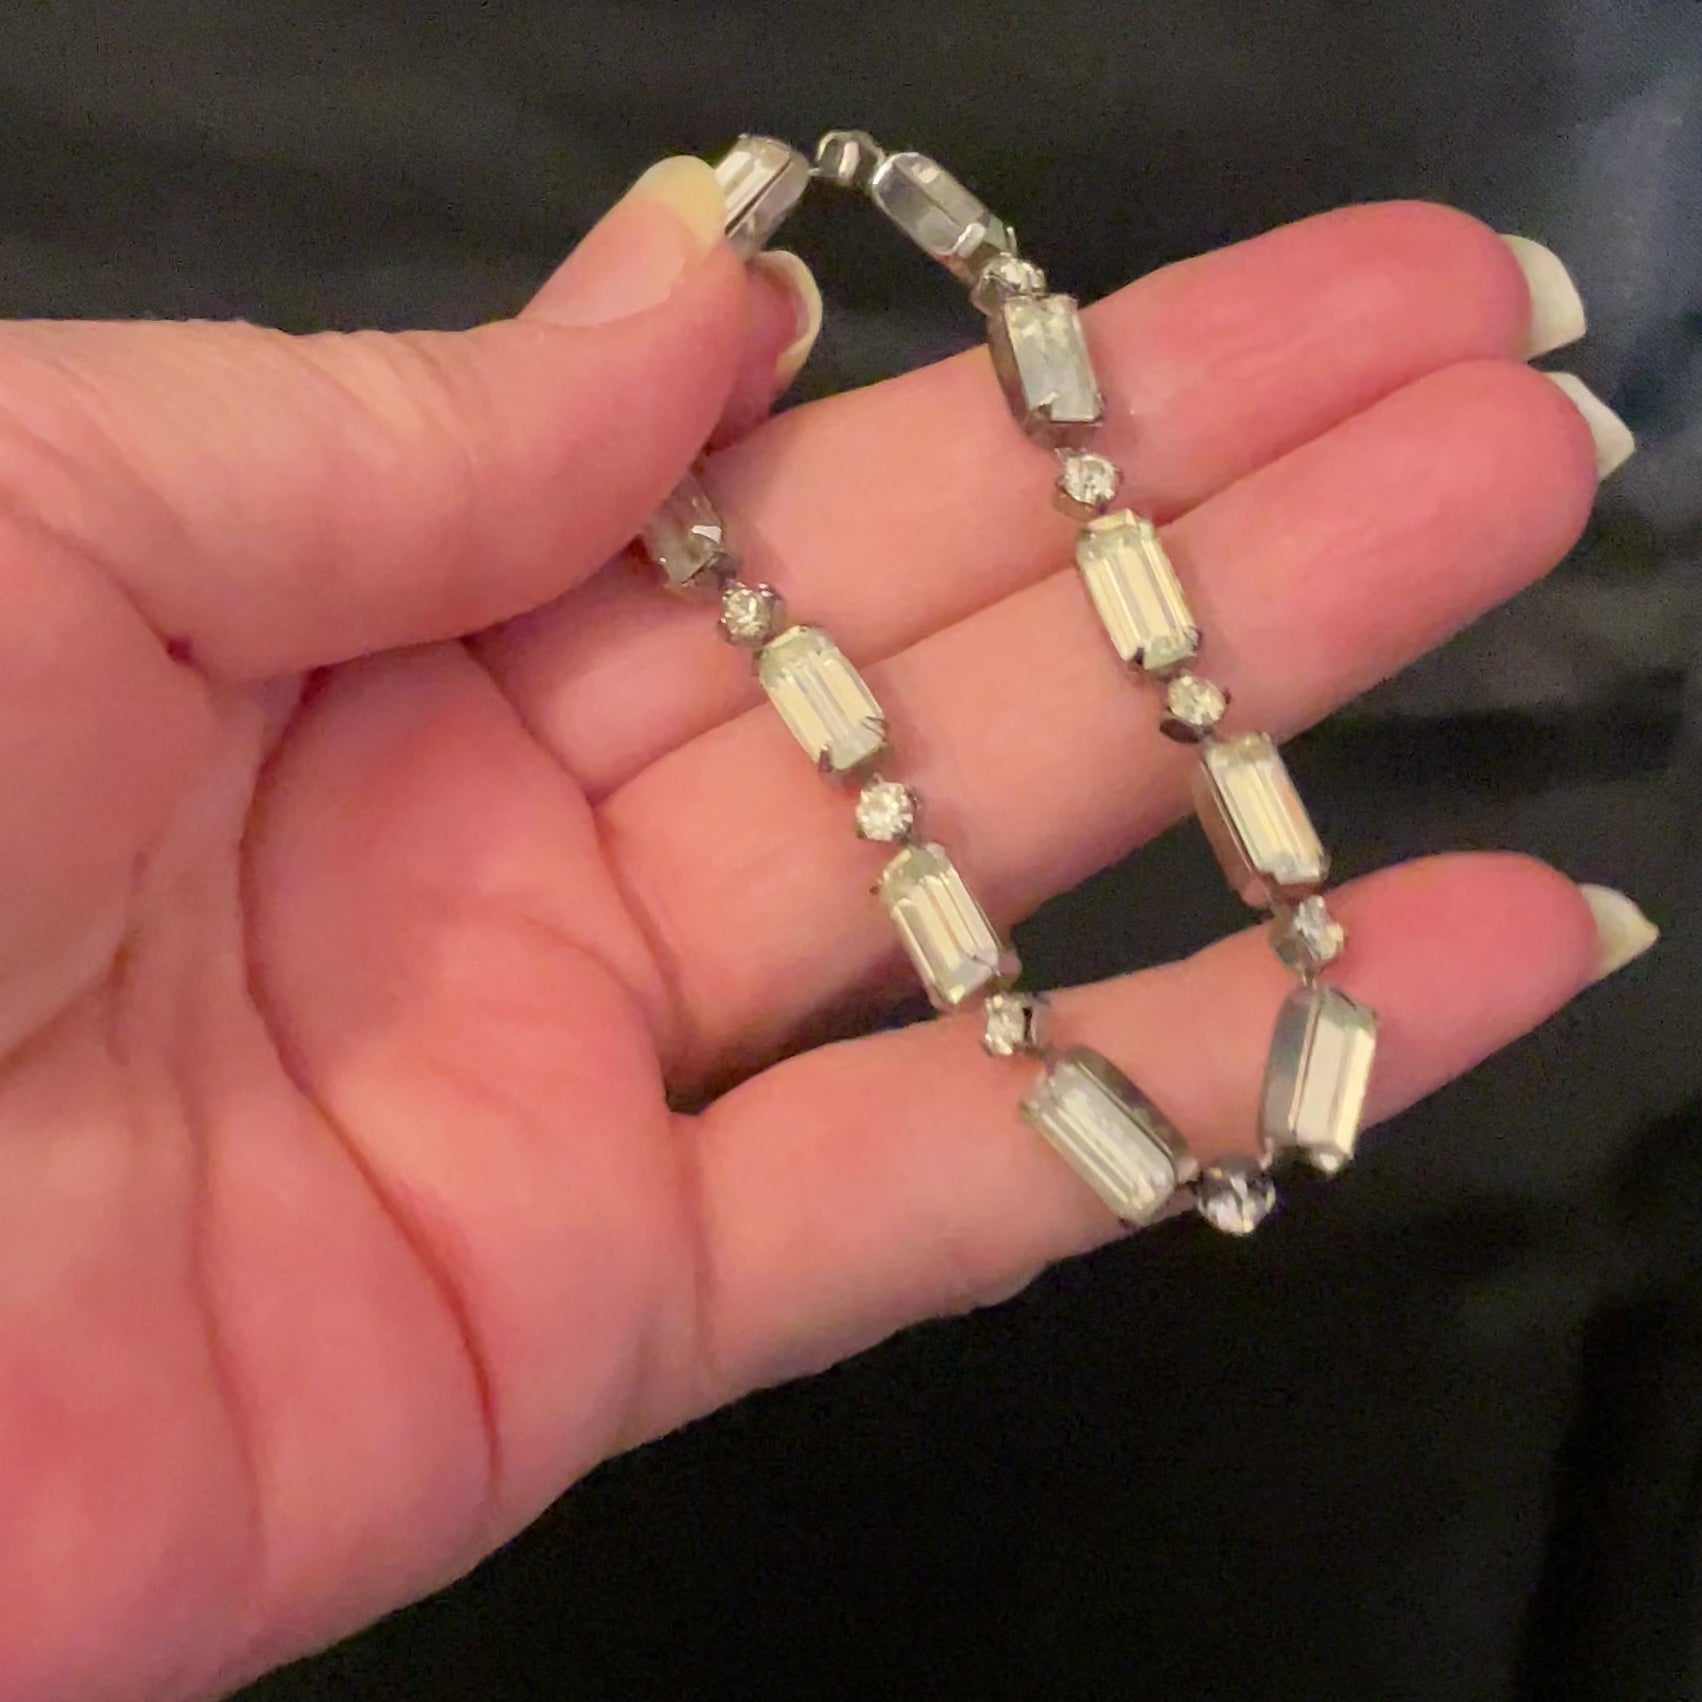 1950's Baguette and Round Vintage Rhinestone Bracelet video showing how the rhinestones sparkle in the light.